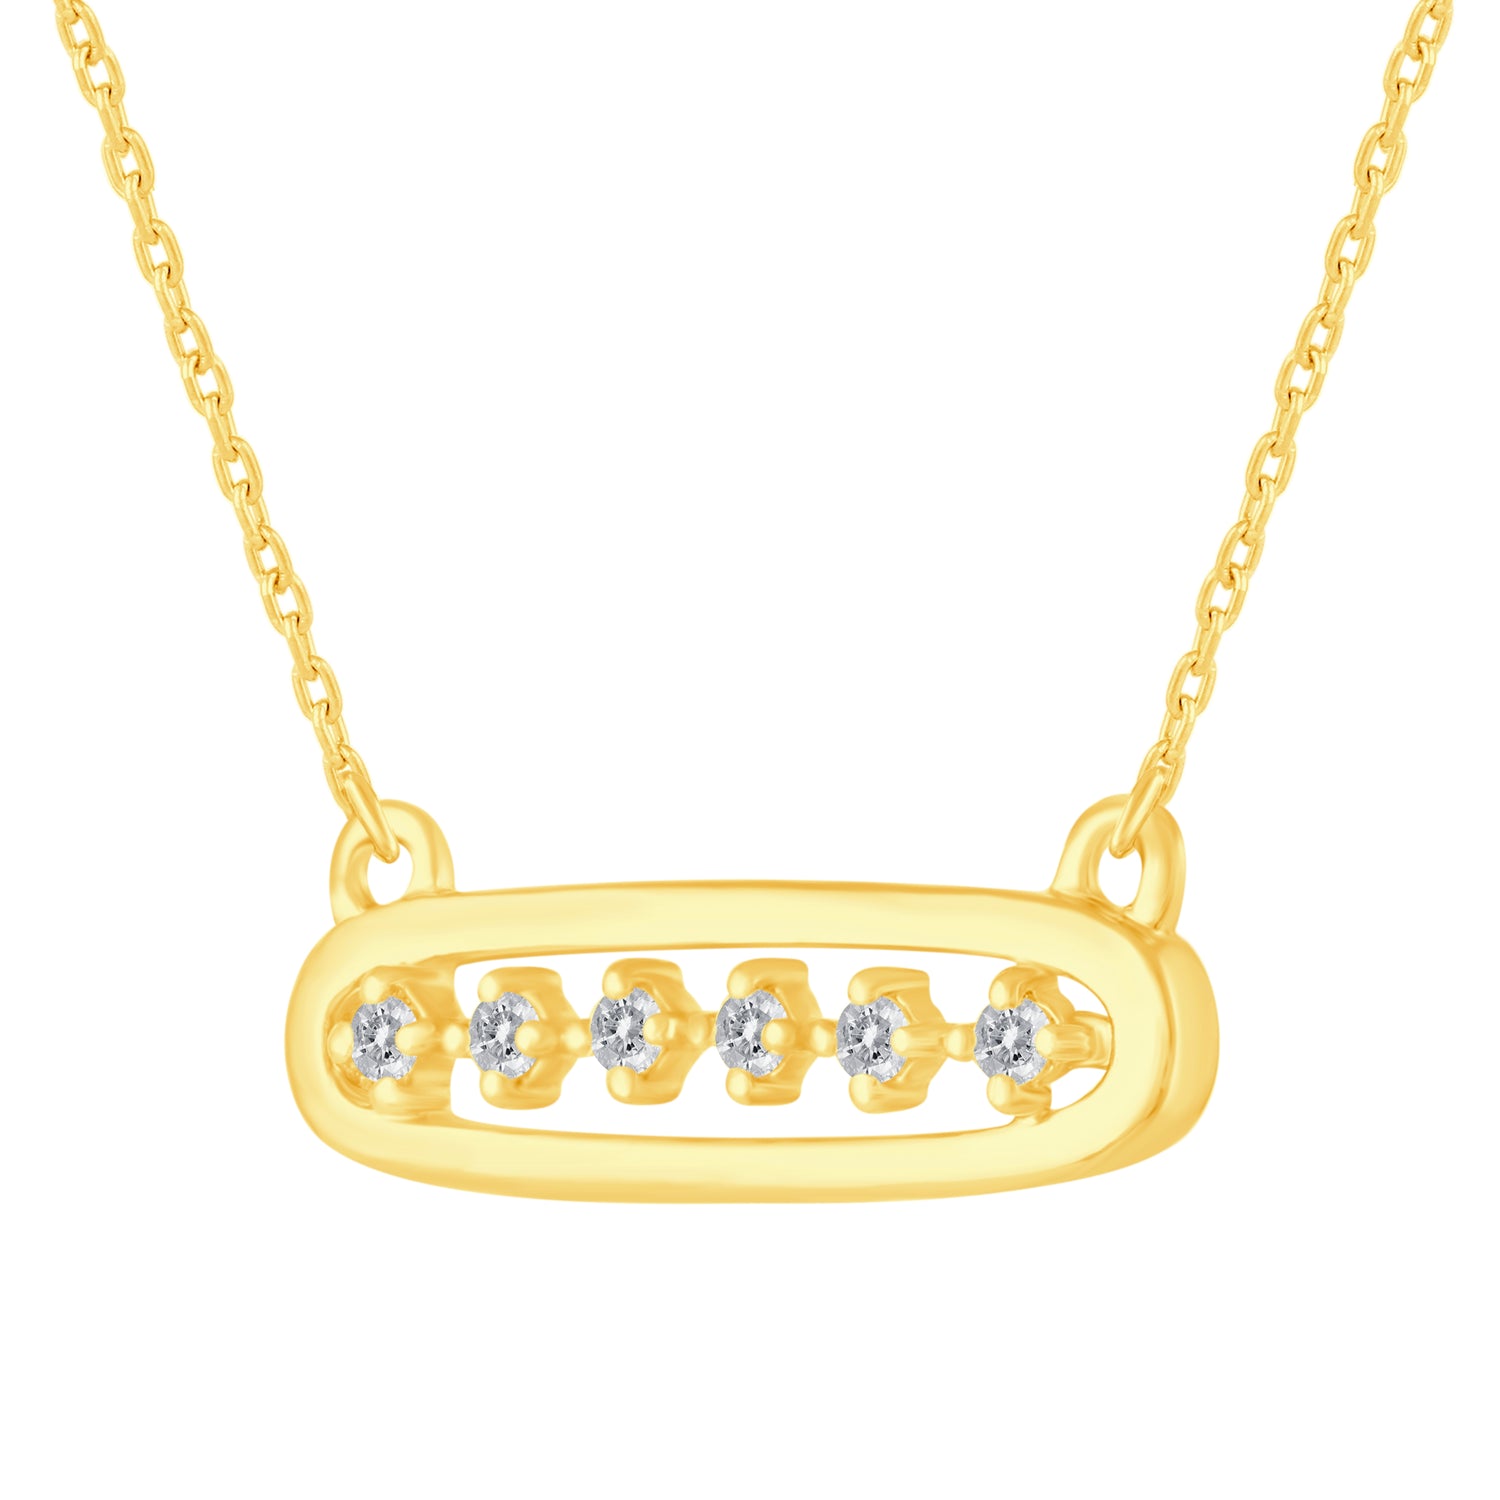 1/10 Cttw Diamond Open Bar Center Station Pendant Necklace set in 925 Sterling Silver Yellow Gold Plating